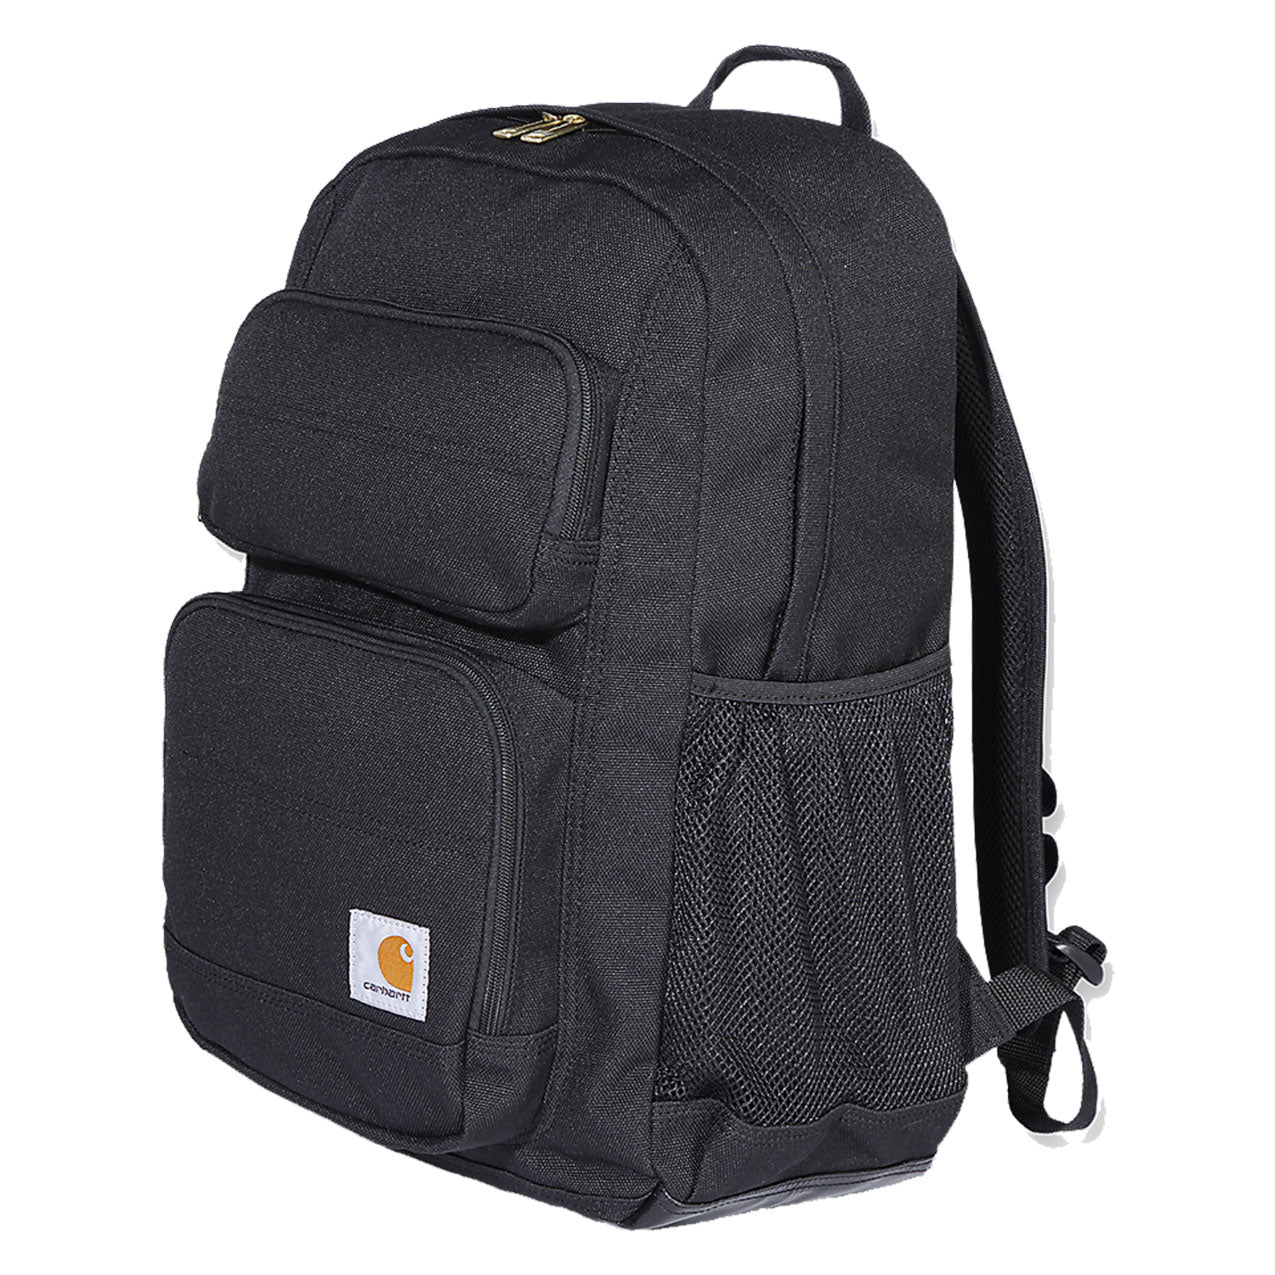 27L SINGLE-COMPARTMENT BACKPACK Black